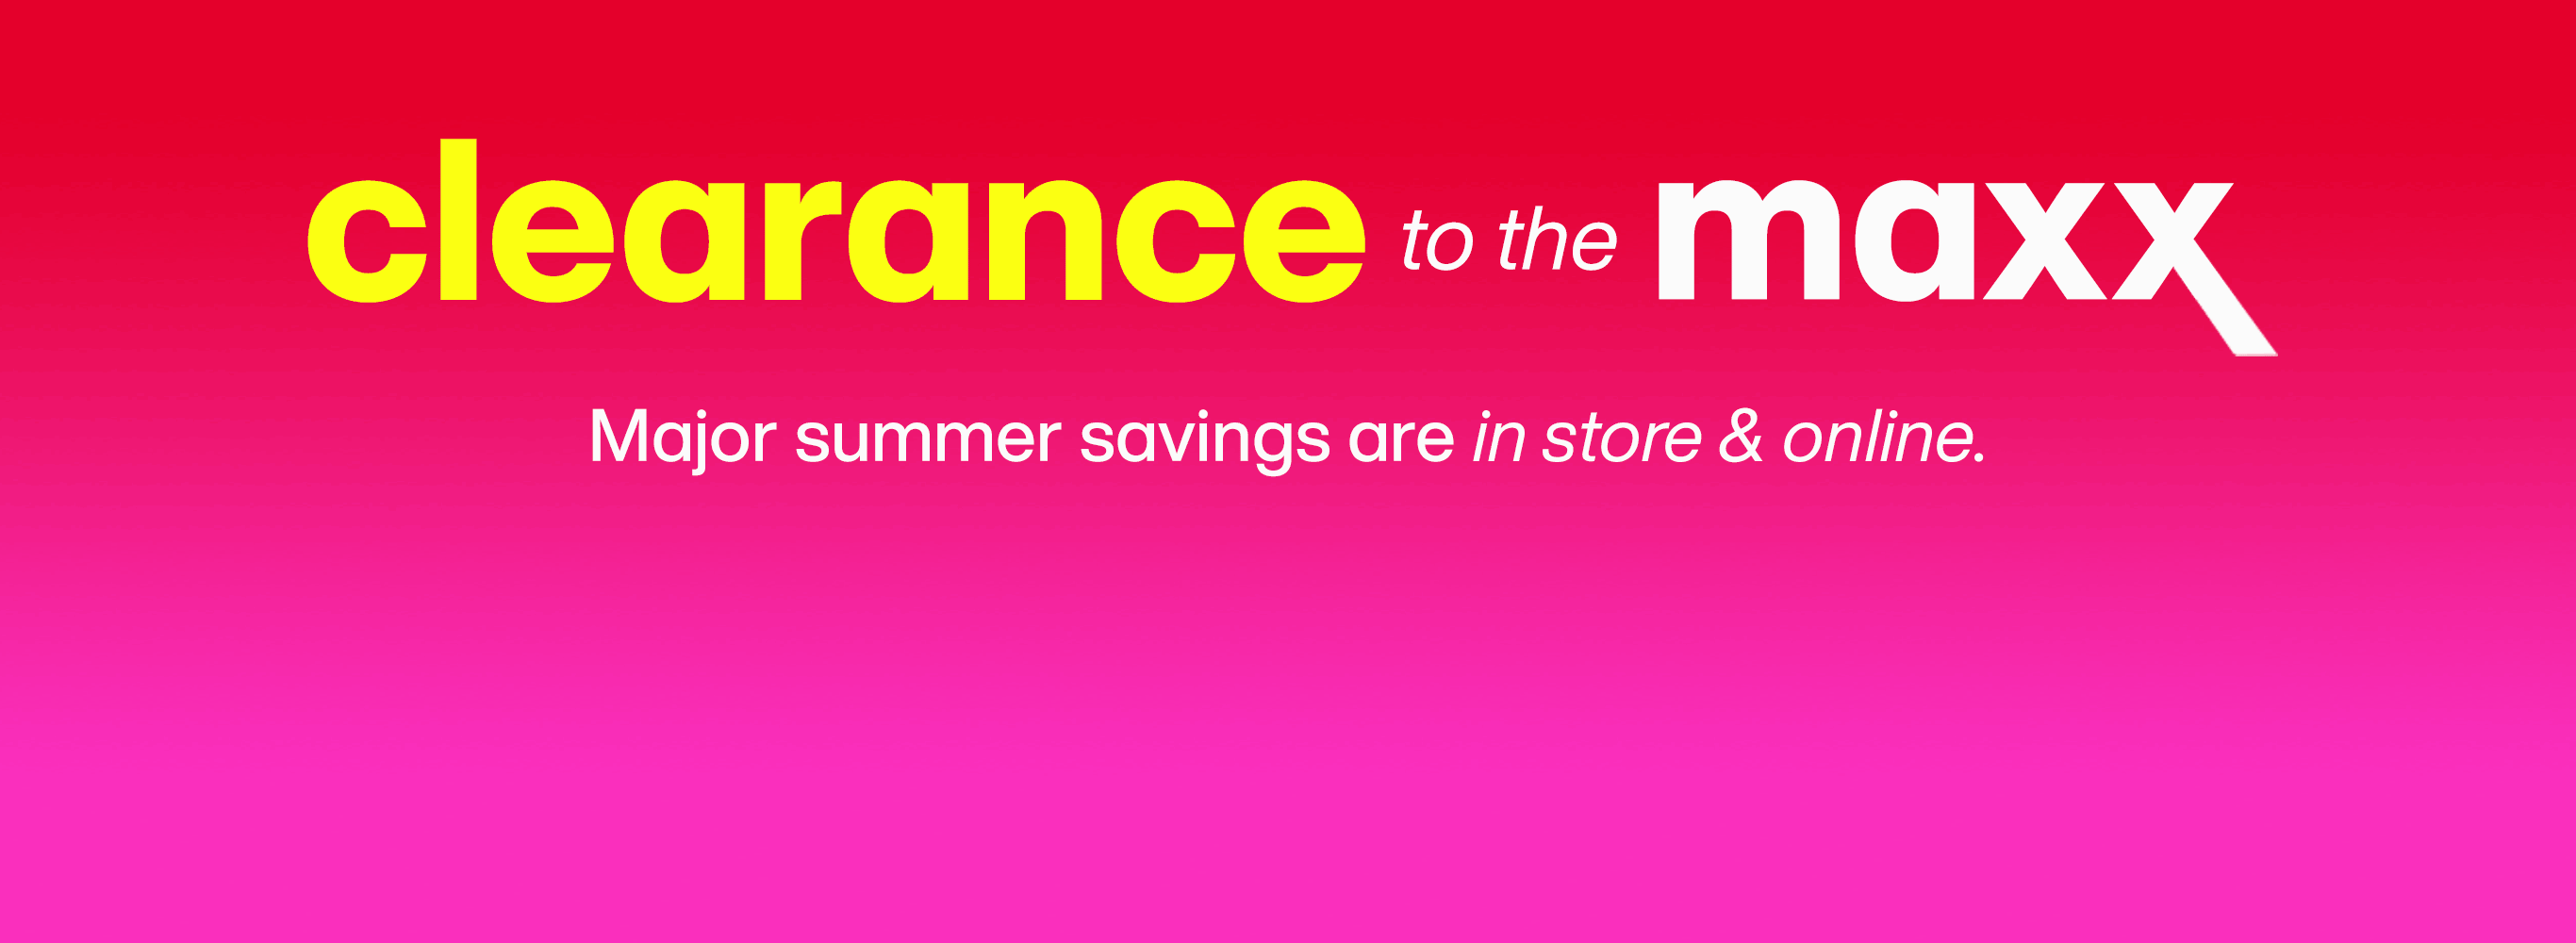 Clearance to the maxx. Major summer savings are in store and online